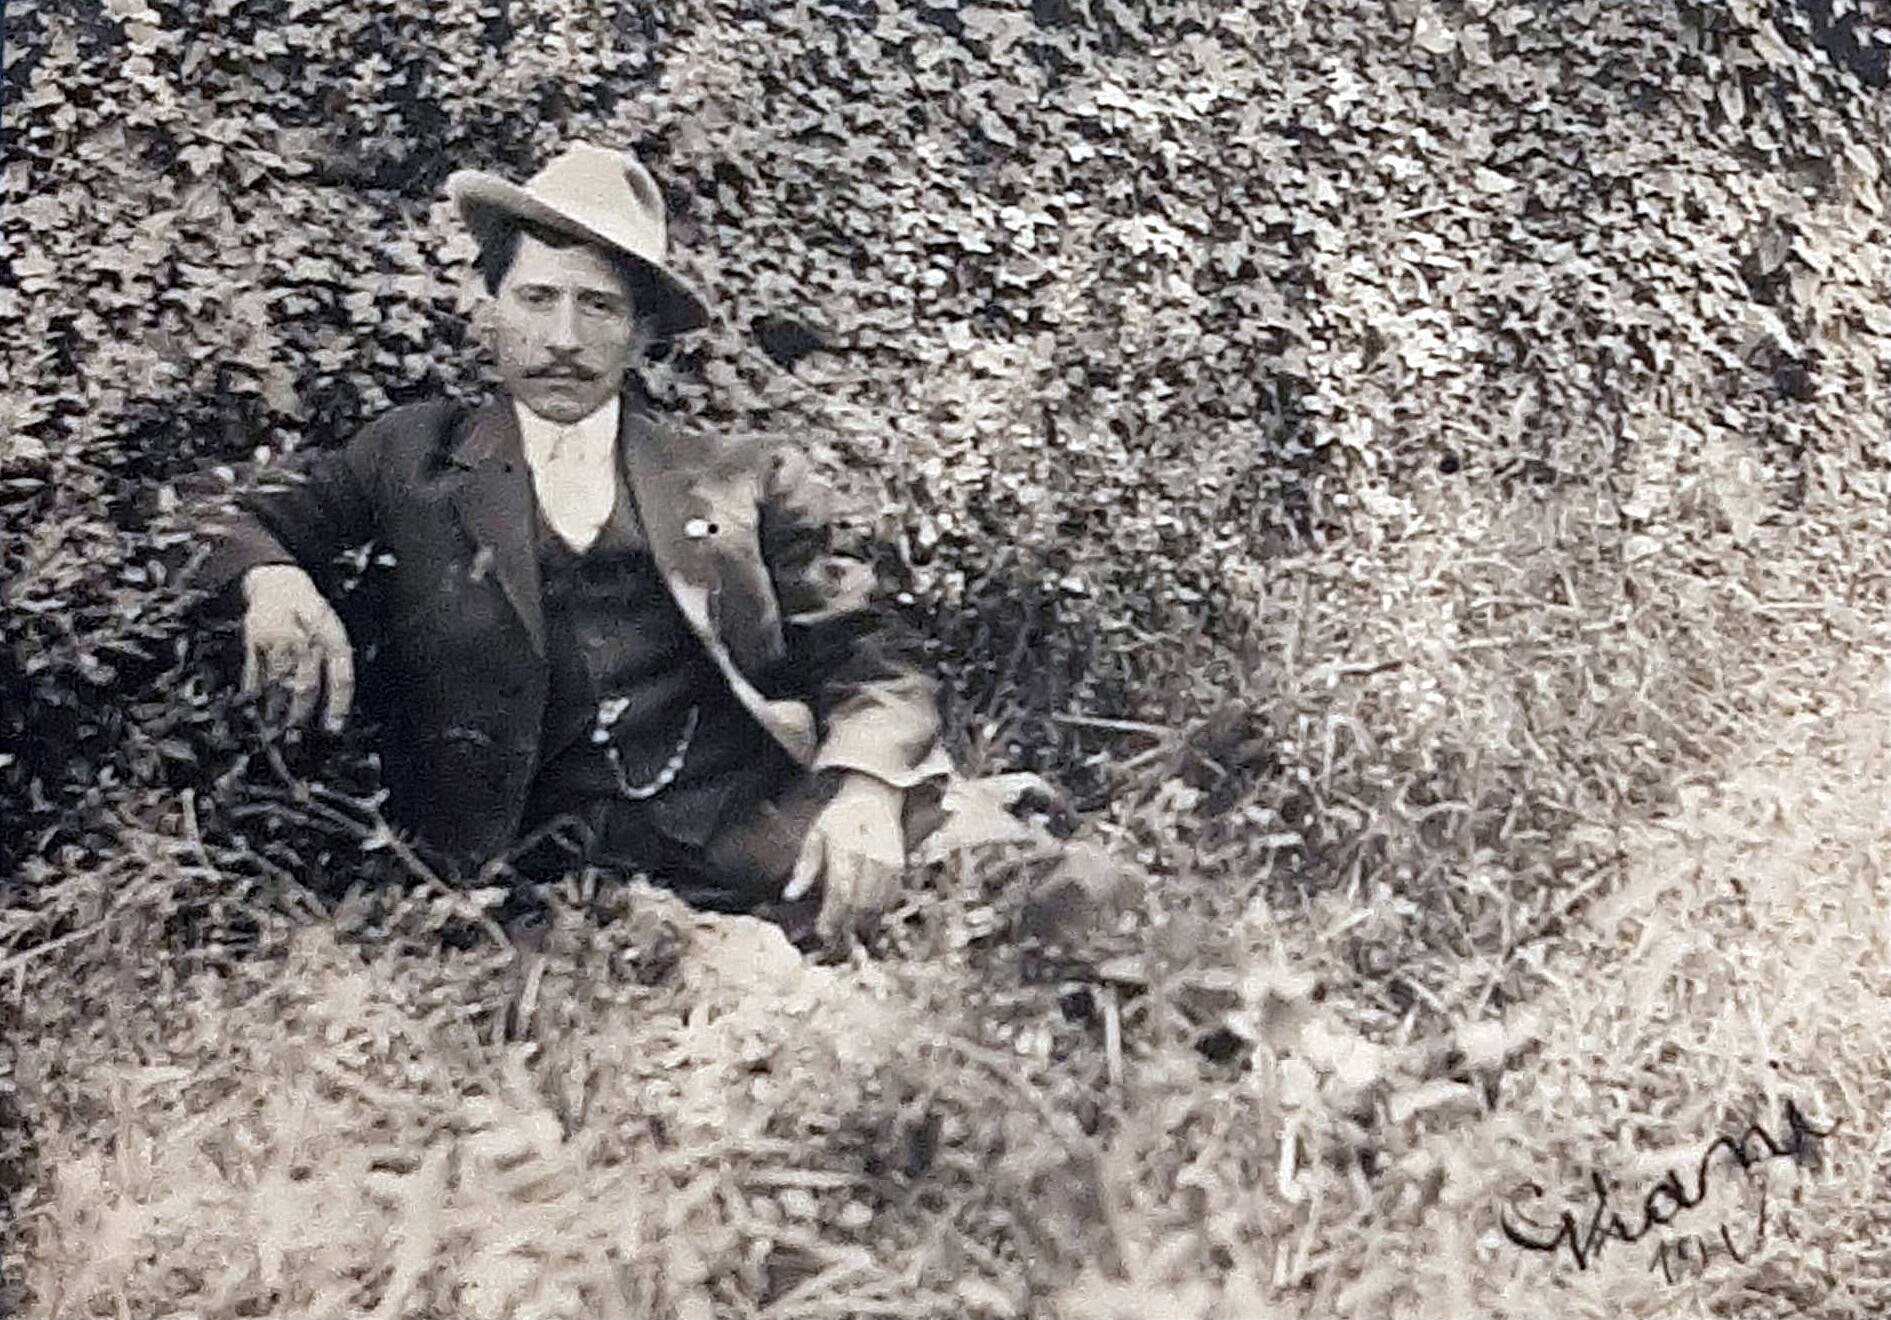 Eventually, all but one of Frenchy’s siblings would live for a time in the United States. Carlo Viani, pictured here in the early 1900s, also spent some time in Alaska. (Photo courtesy of the Viani Family Collection)